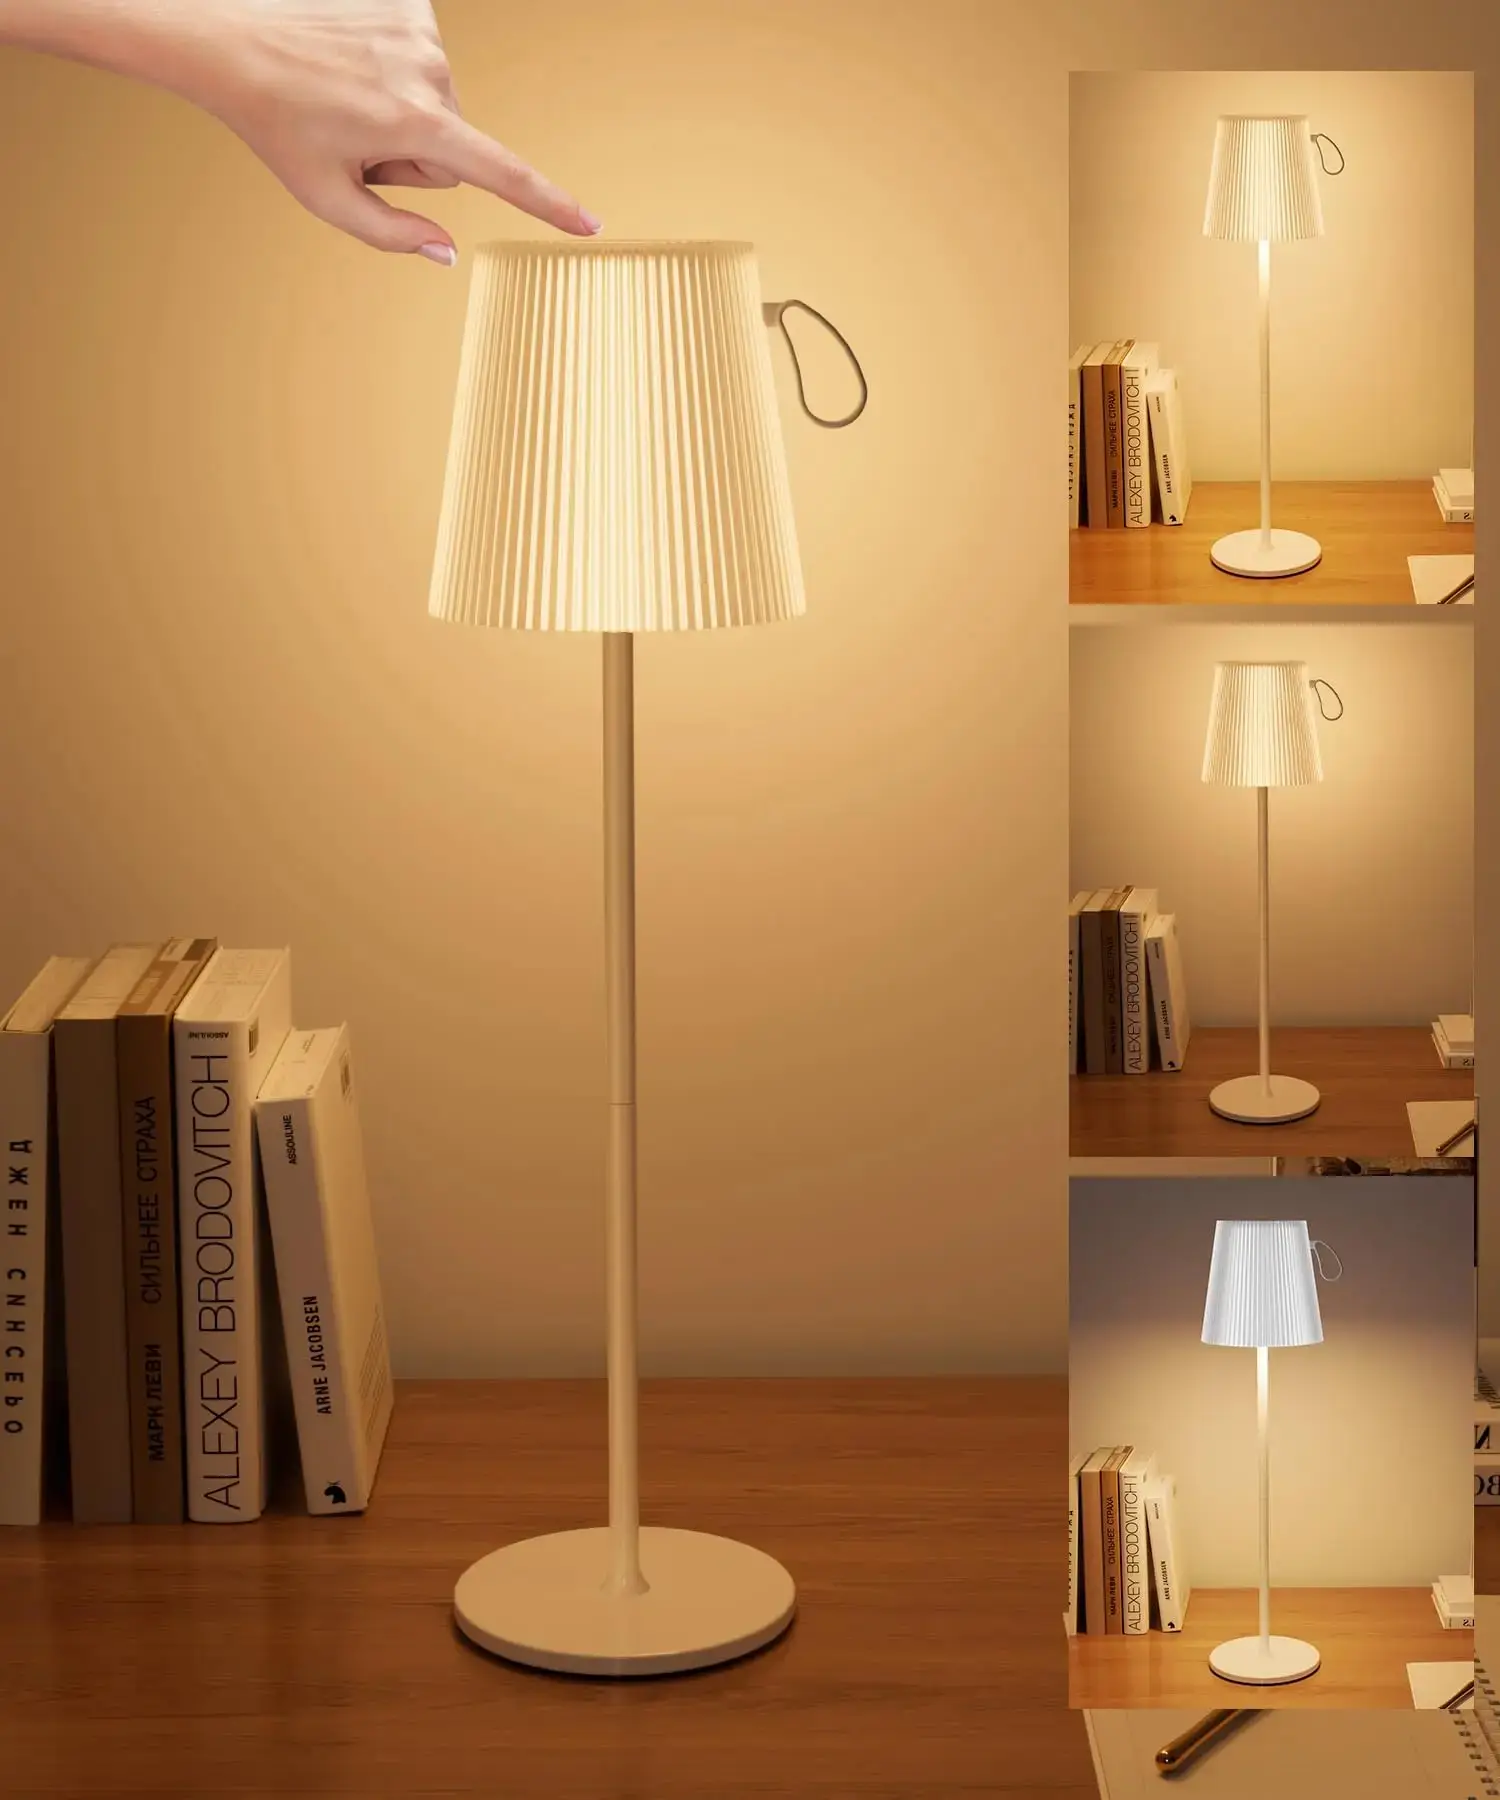 S touch nightstand lamp grb dimmable rechargeable battery operated led night light ip54 thumb200